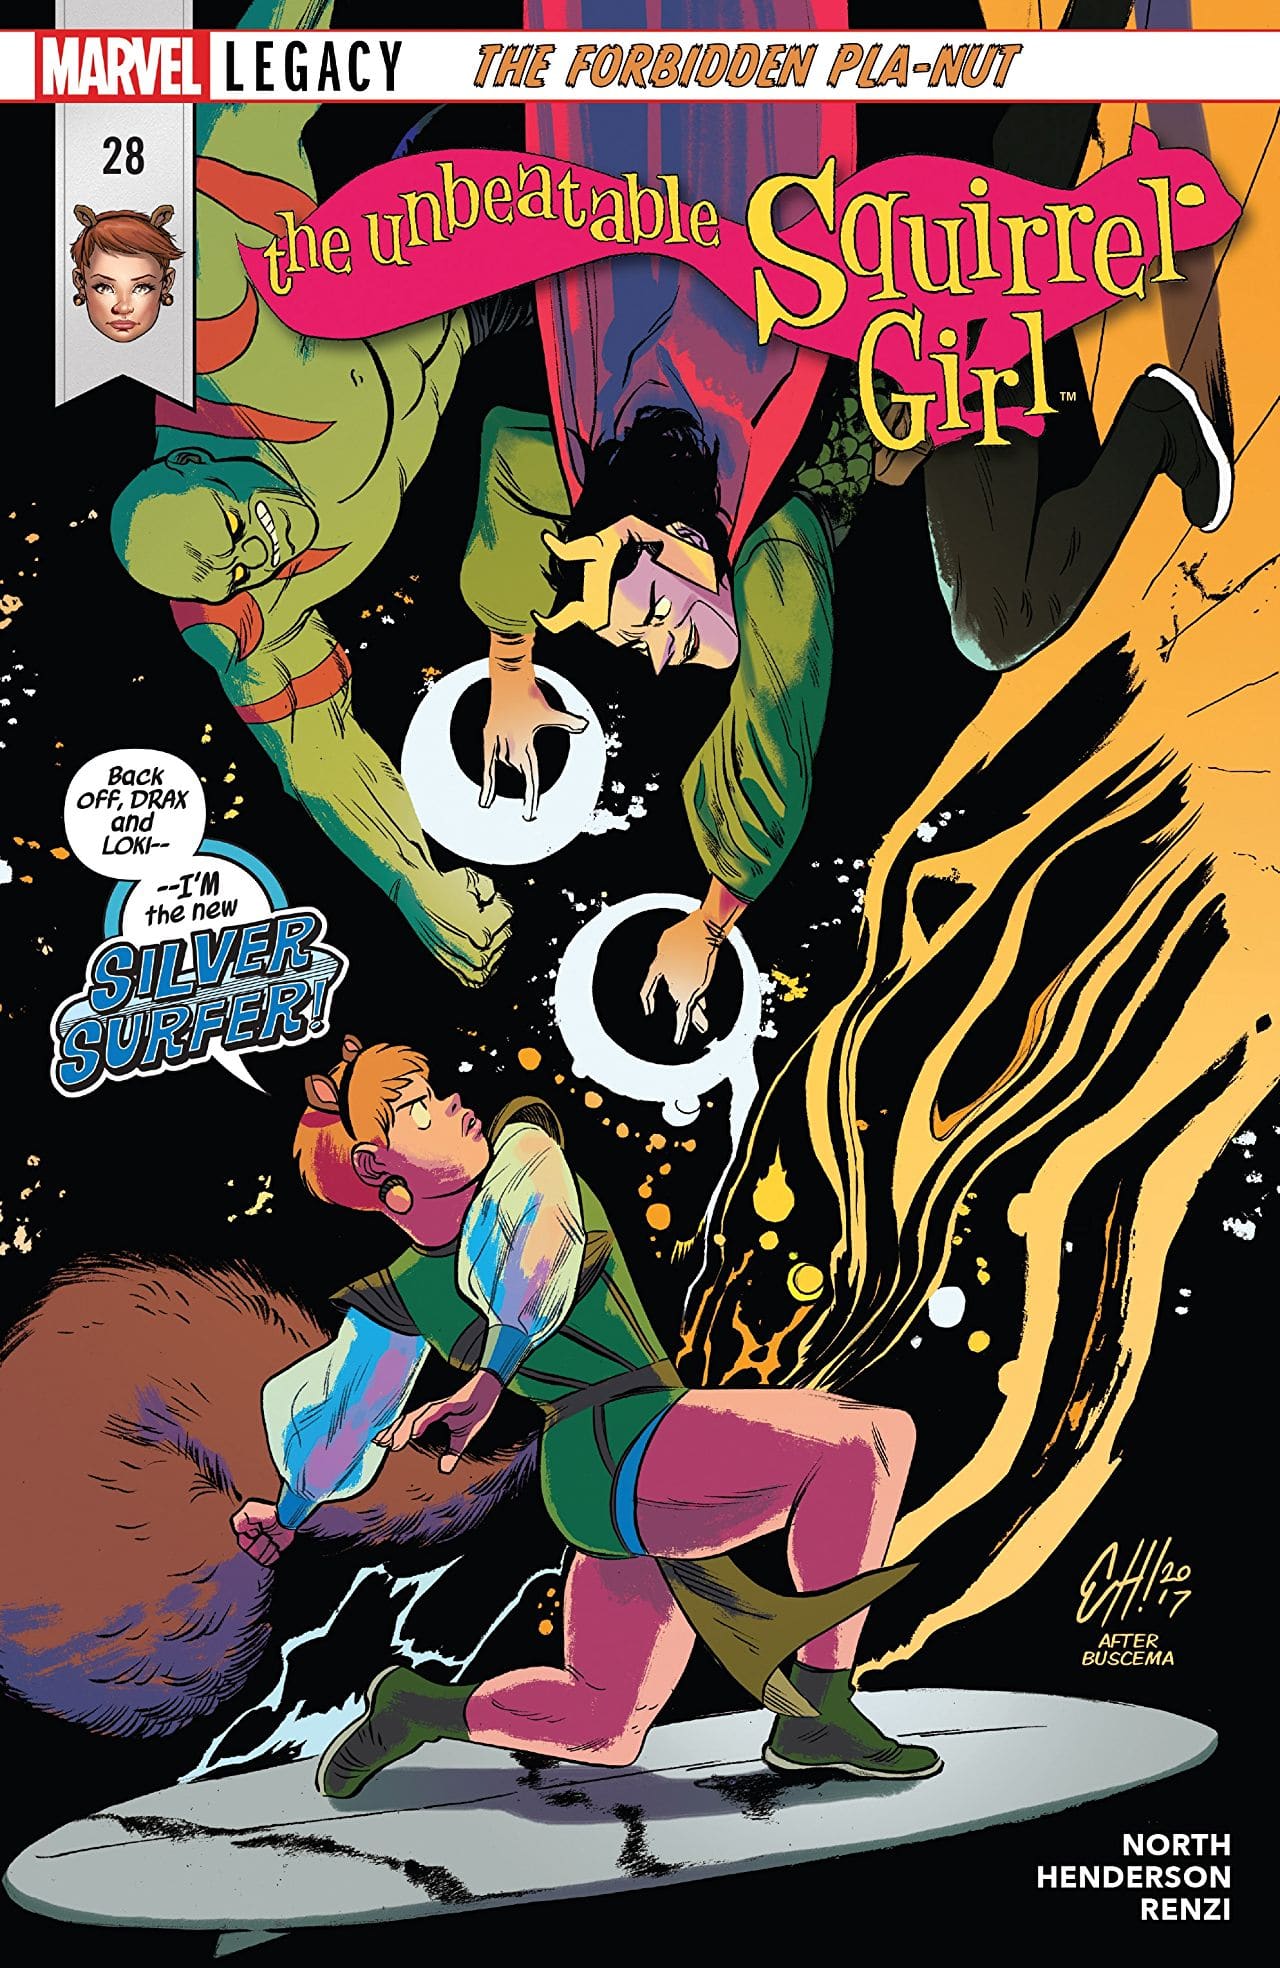 The Unbeatable Squirrel Girl #28 Review